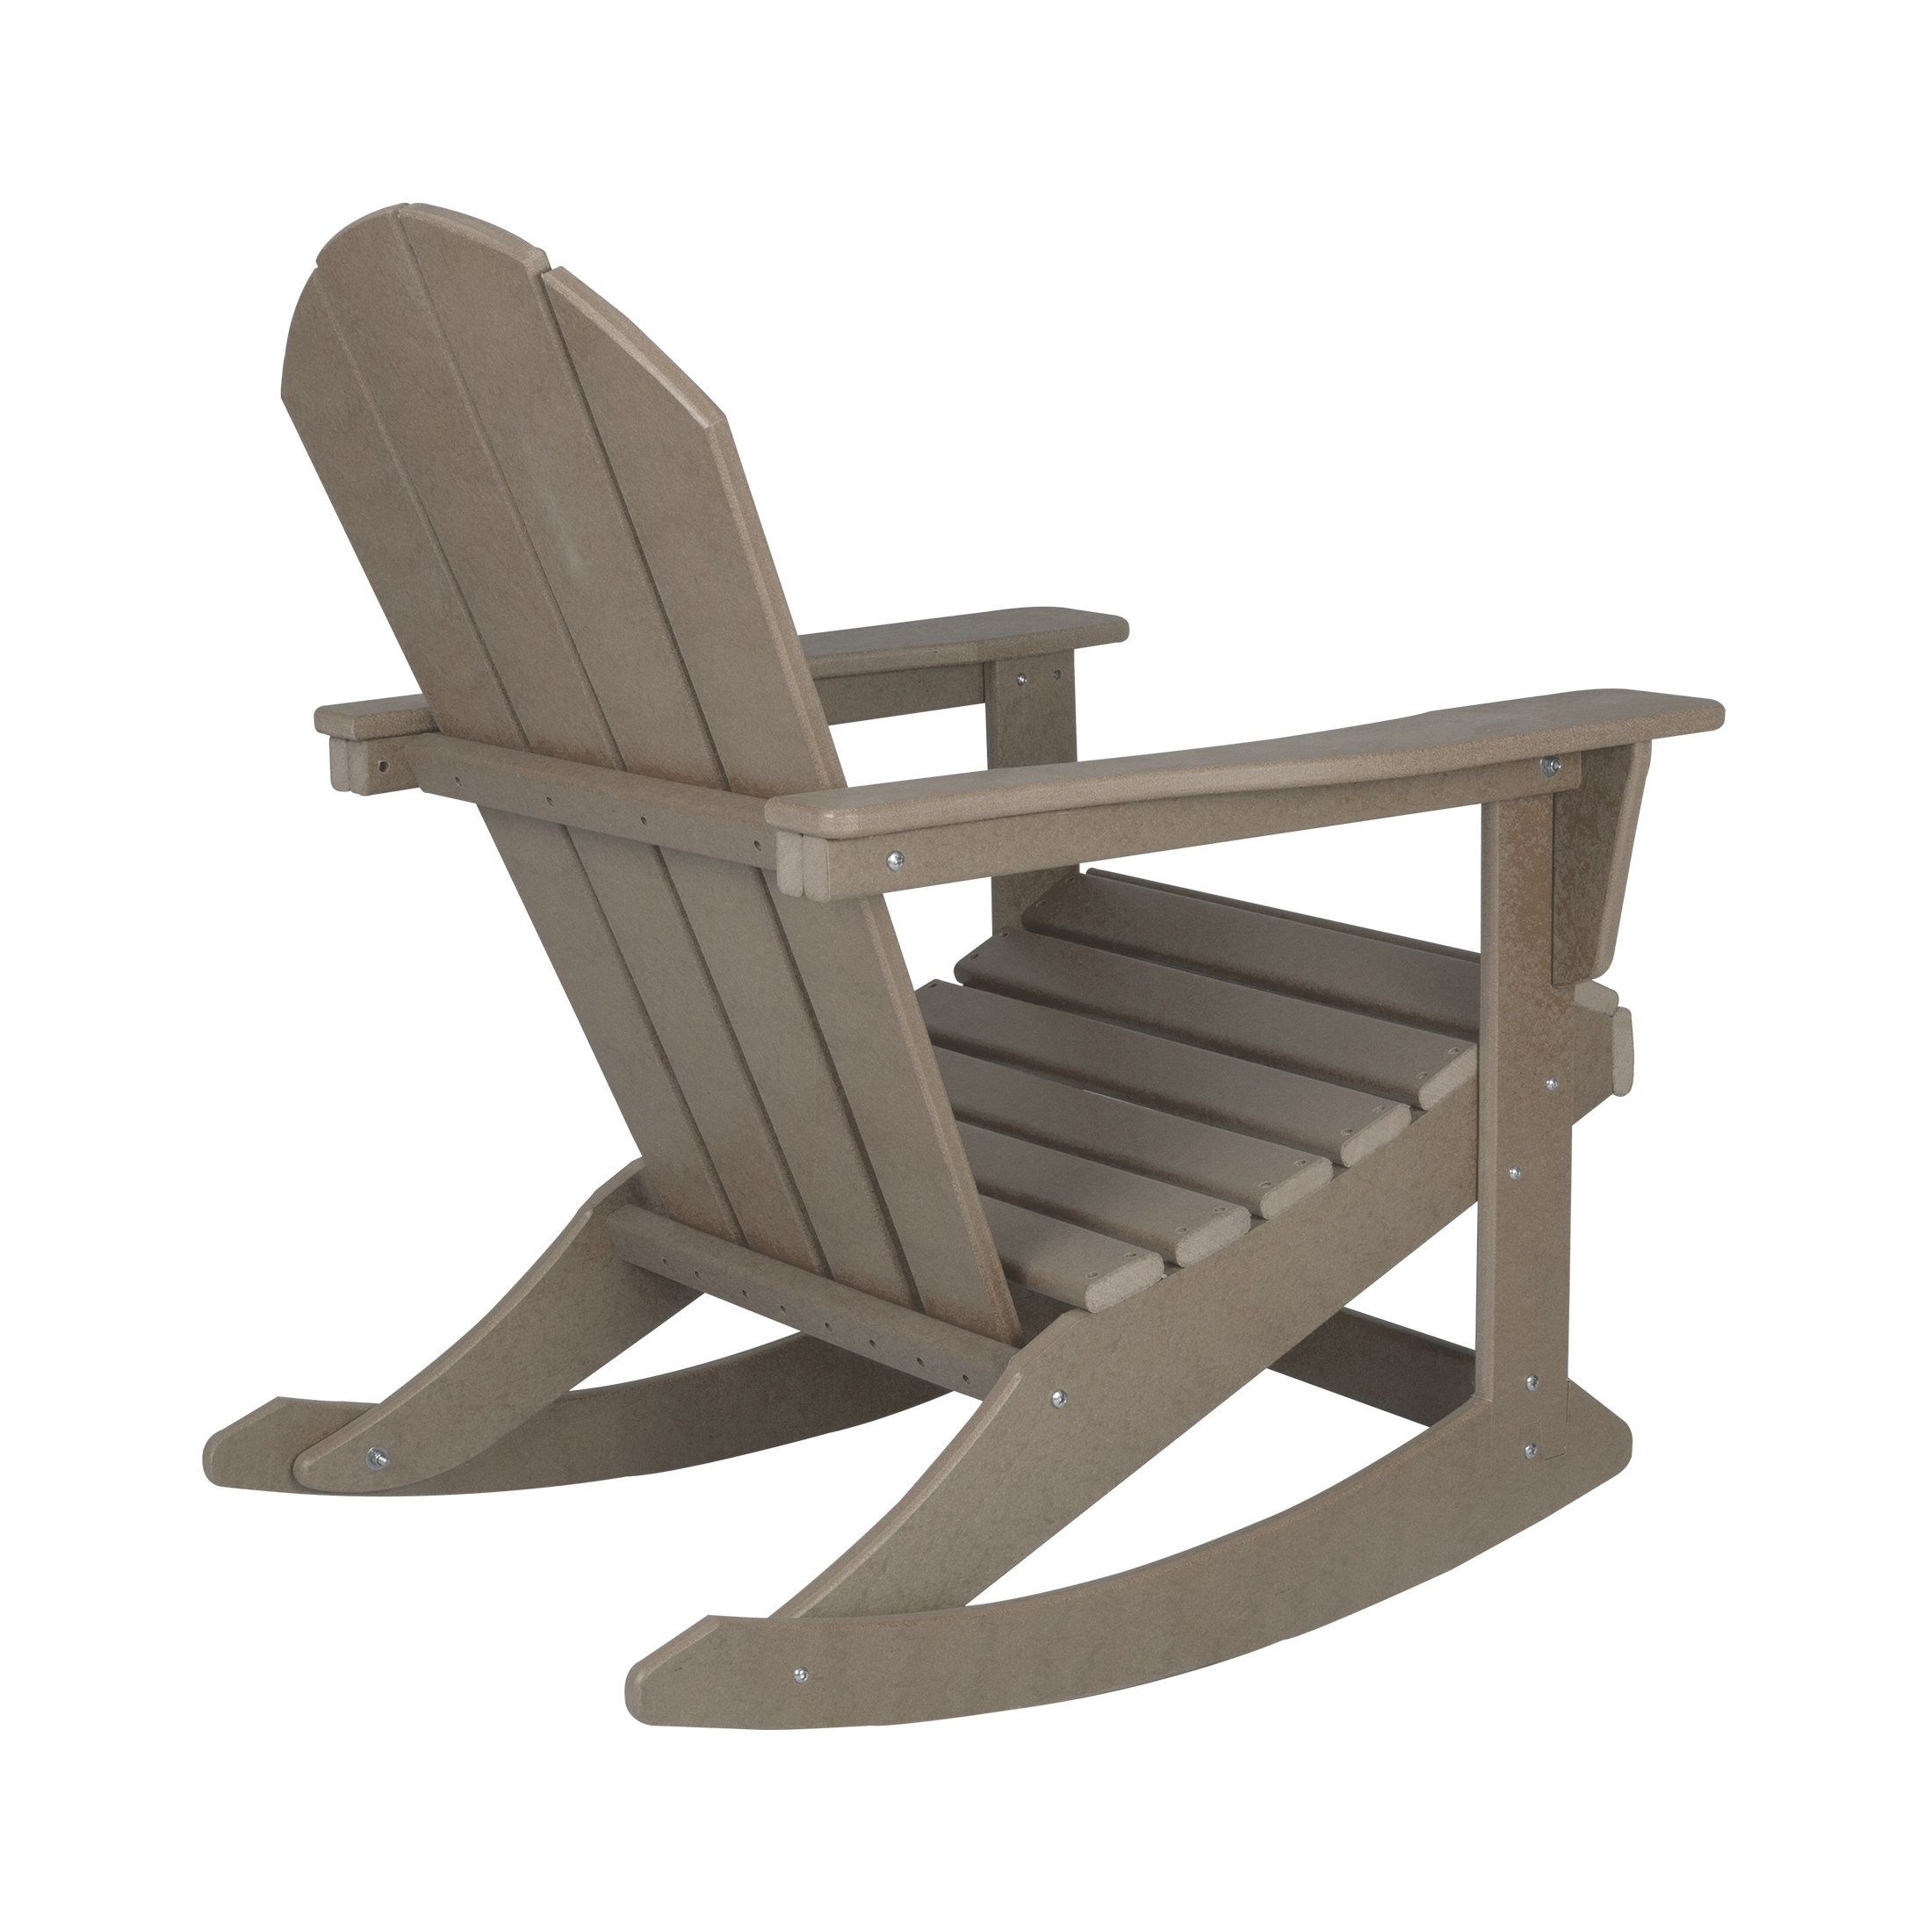 GARDEN Plastic Adirondack Rocking Chair for Outdoor Patio Porch Seating, Weathered Wood - image 3 of 7